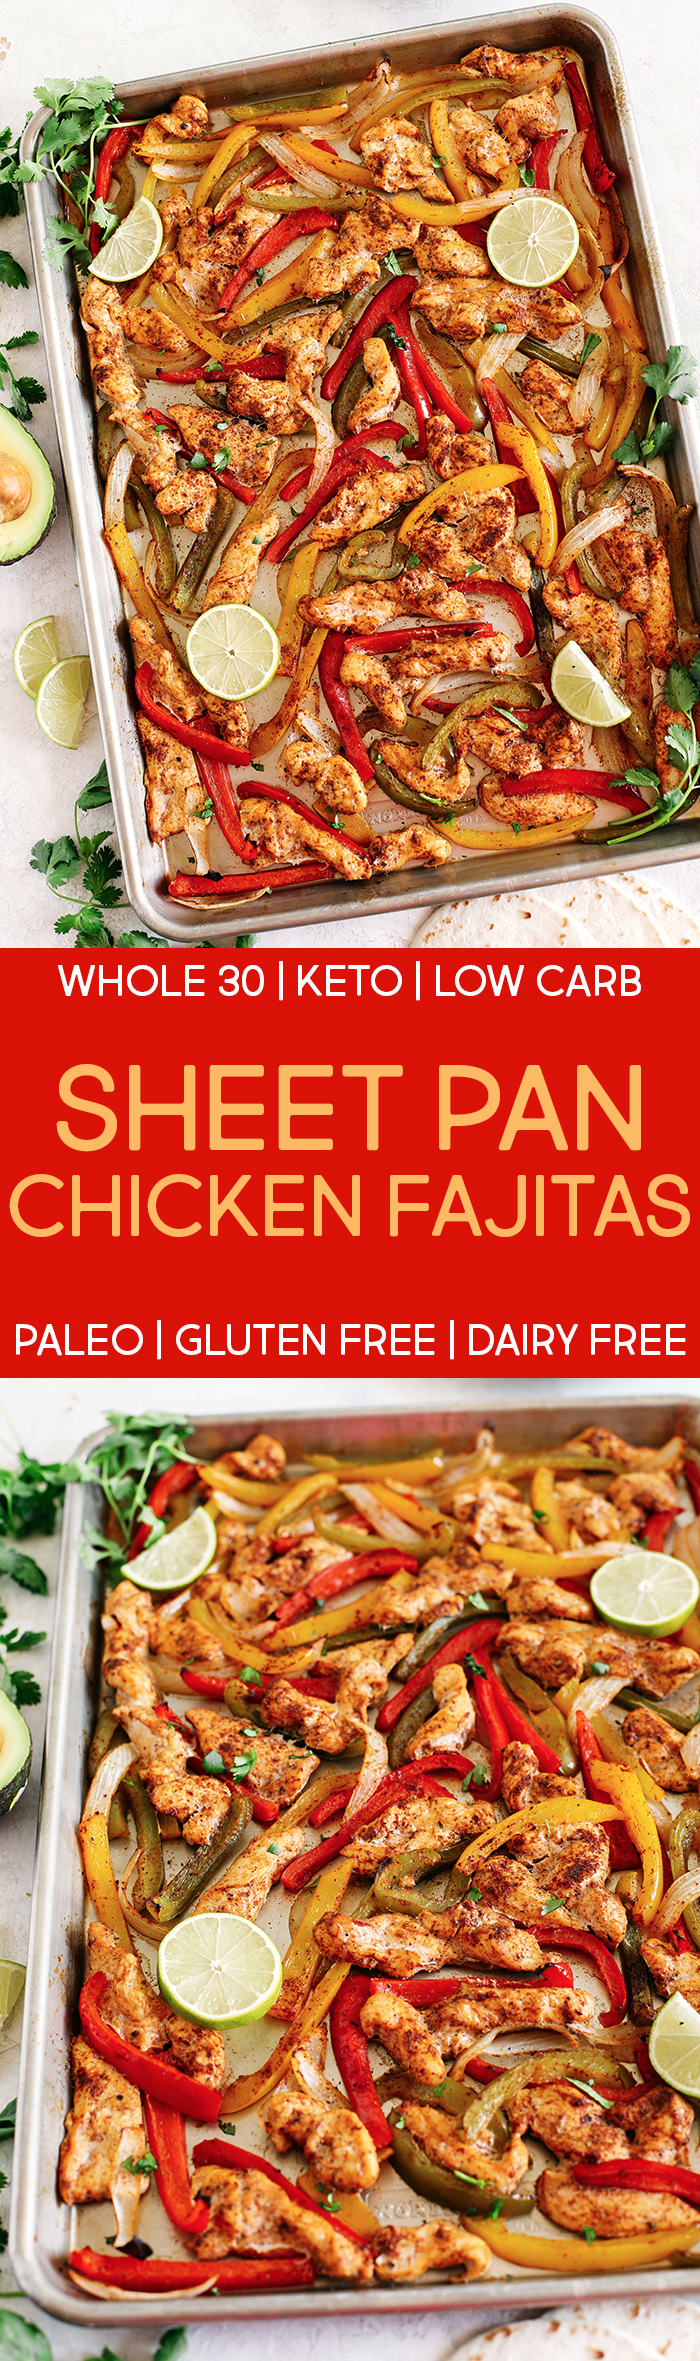 EASY Sheet Pan Chicken Fajitas with all your favorite Mexican flavors that makes the perfect healthy weeknight dinner easily made all on one pan in under 30 minutes!  Perfect recipe for your Sunday meal prep too!  